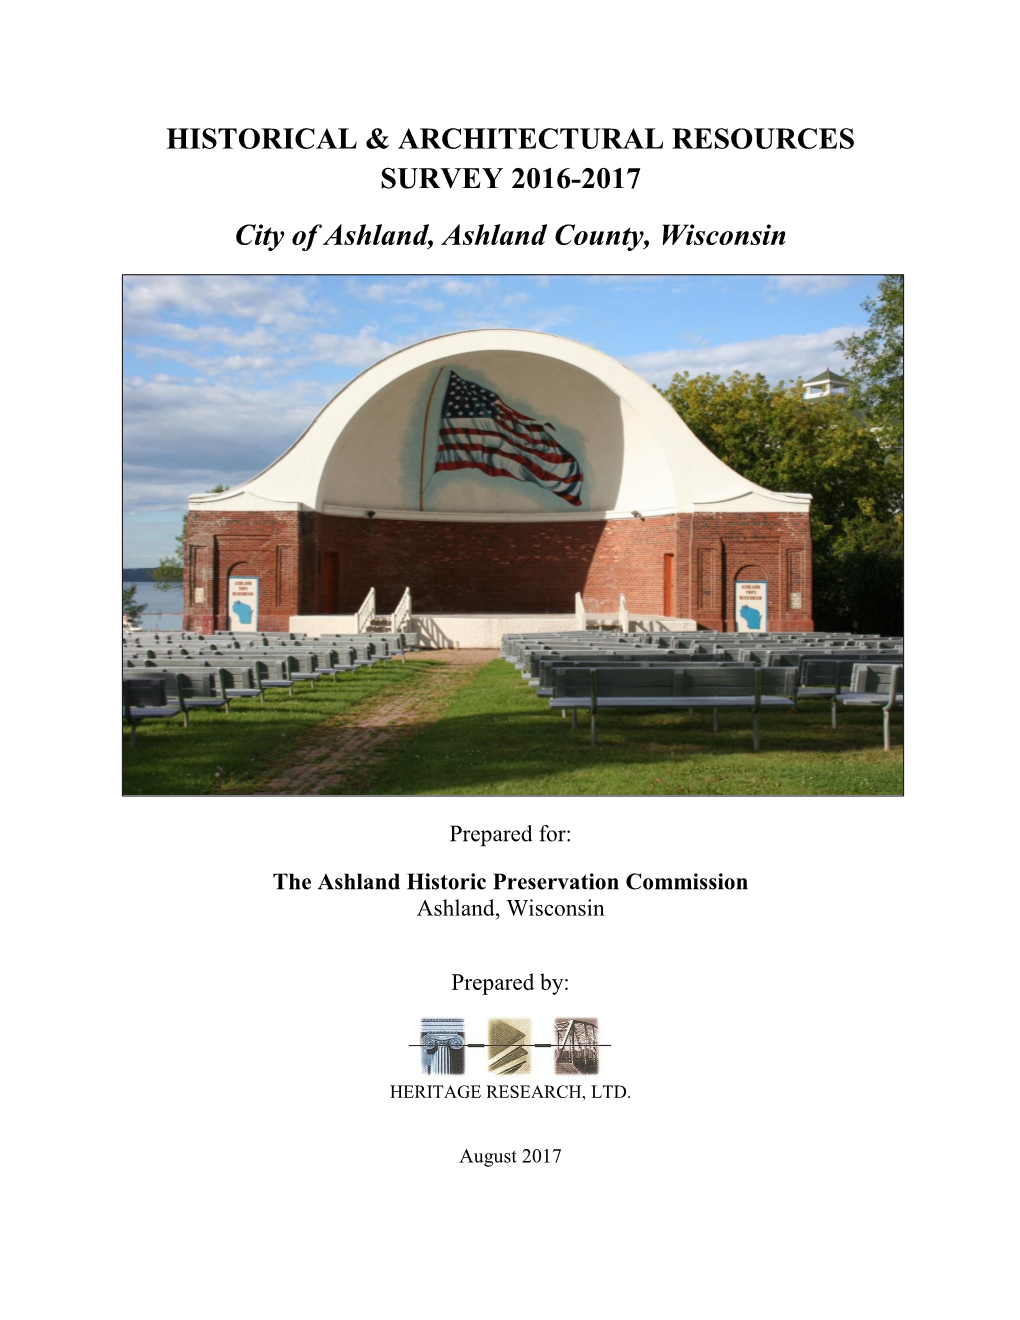 2016-2017 Historical and Architectural Resources Survey